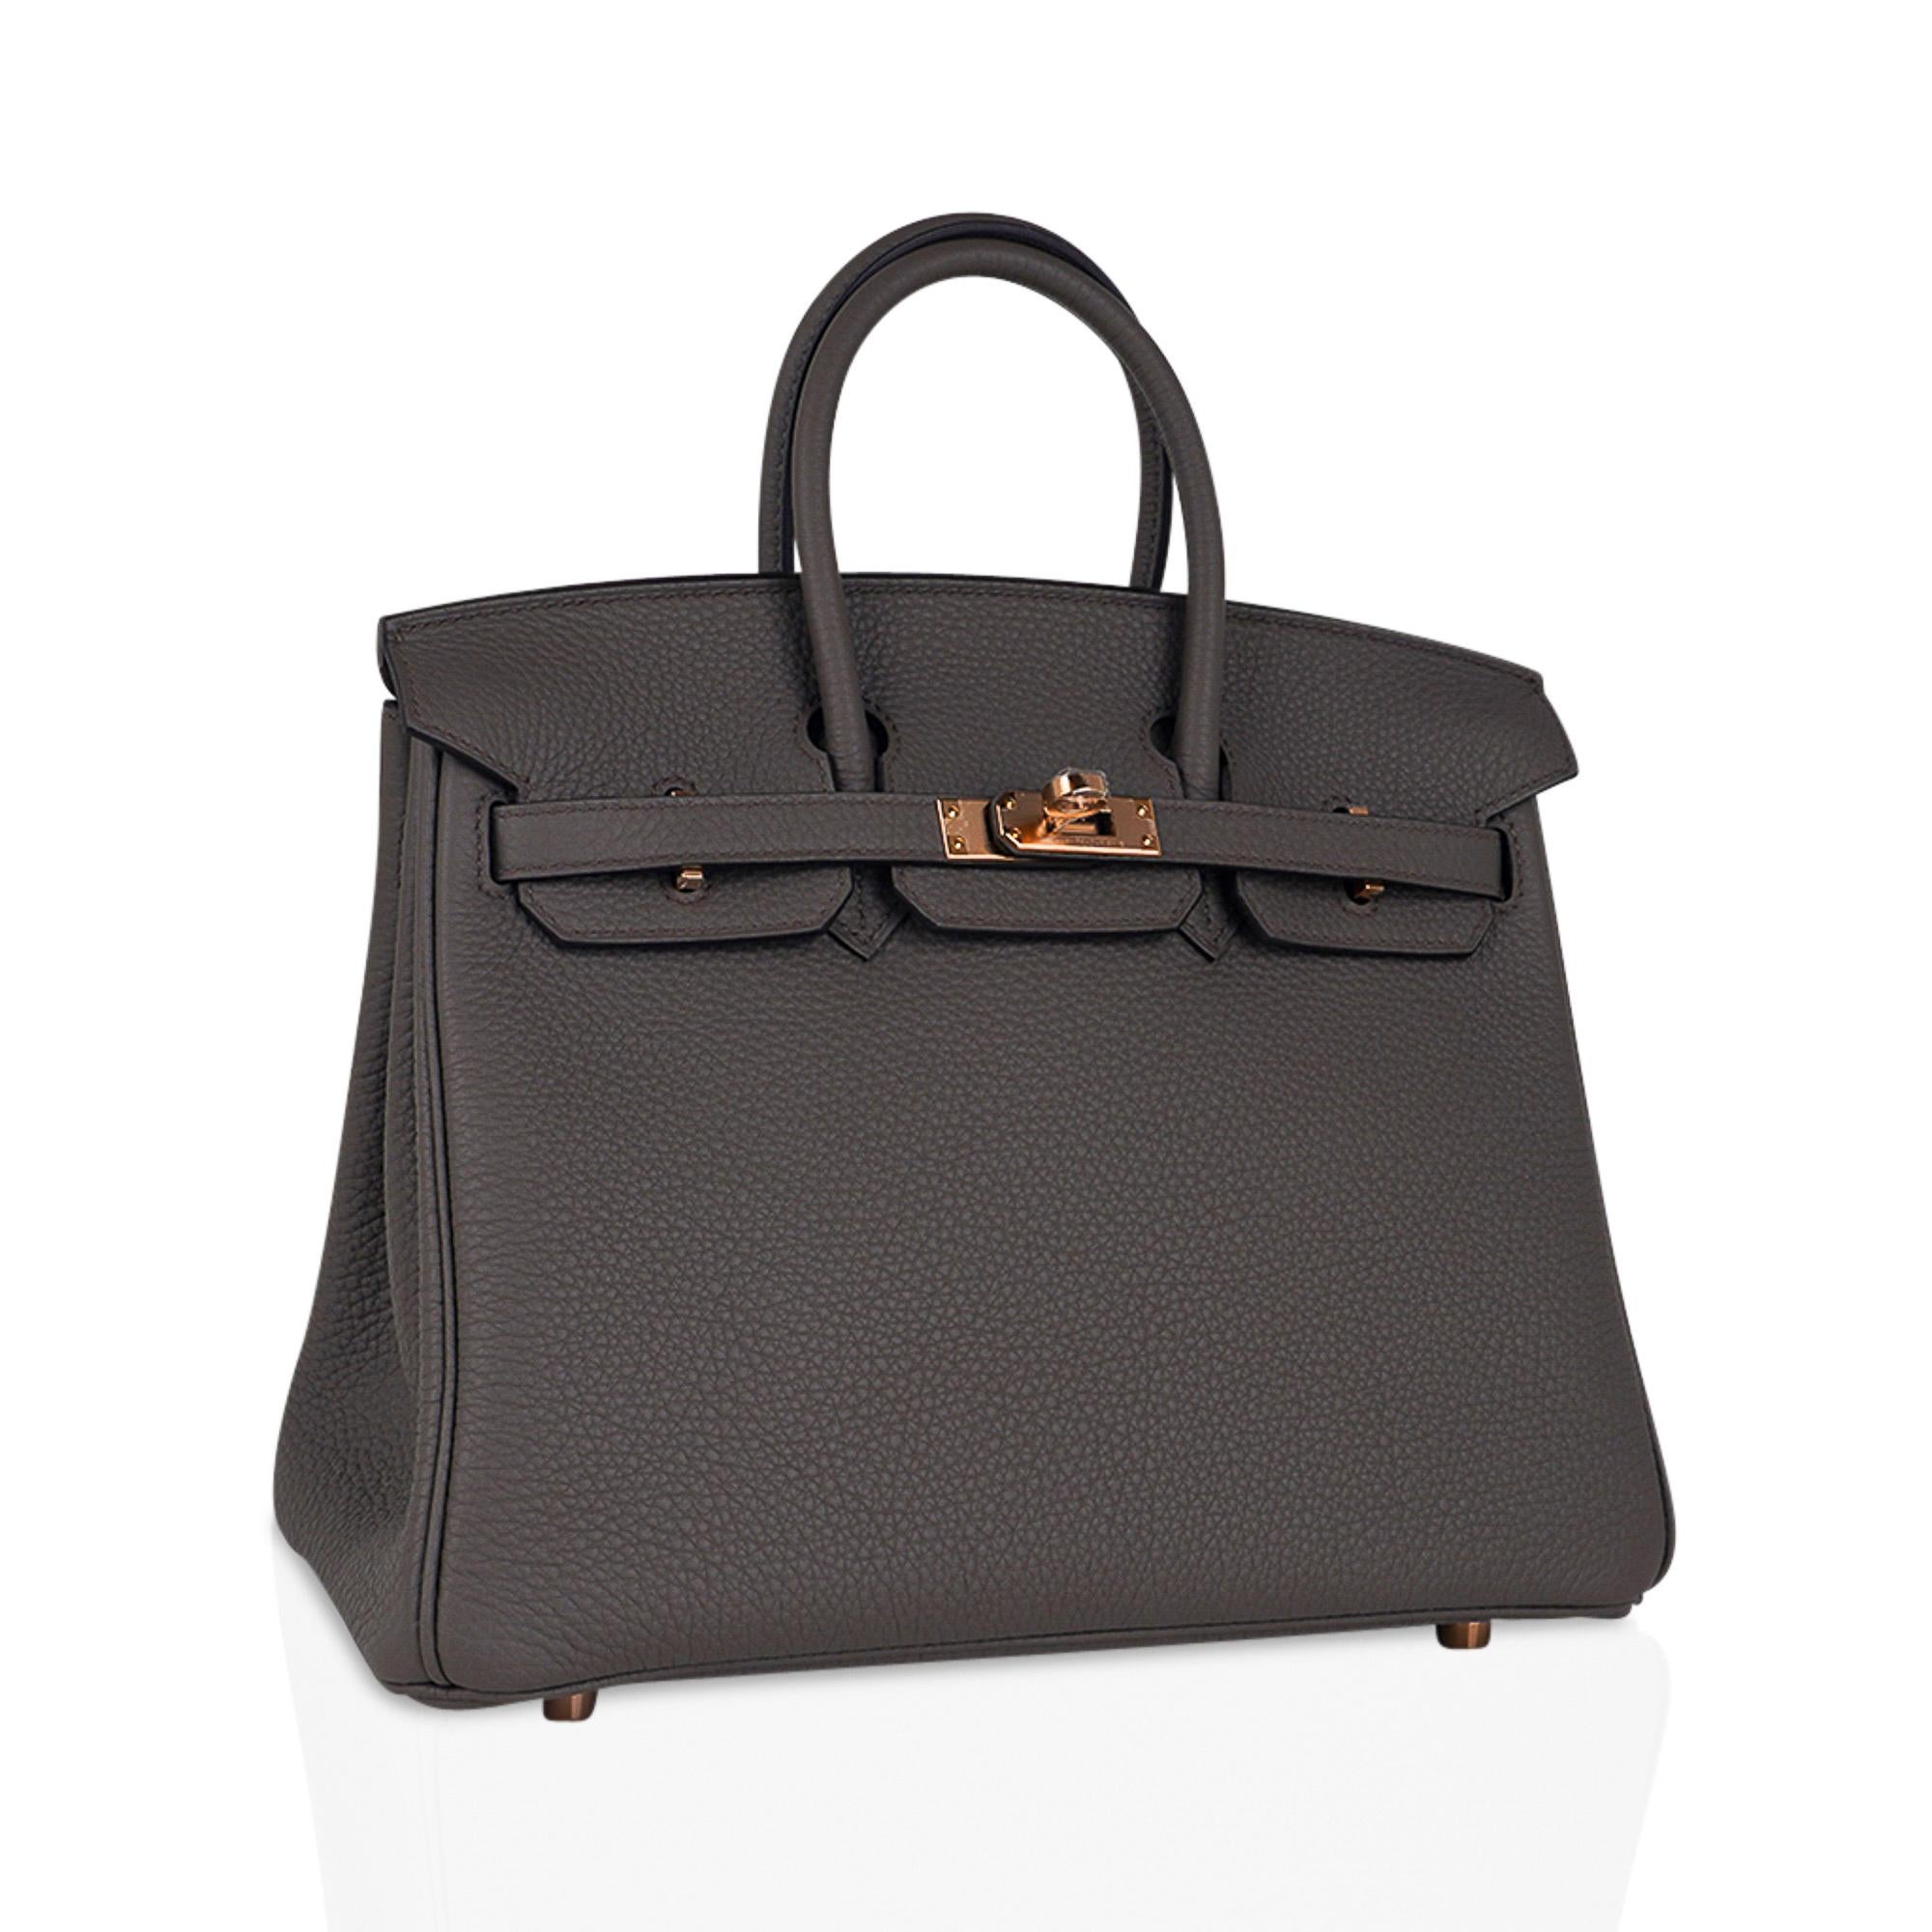 Mightychic offers an Hermes Birkin 25 bag featured in Etain with rare Rose Gold hardware.
Stunning rich neutral Hermes Birkin bag perfect for year round wear.
Supple Togo leather.
NEW or NEVER WORN.
Comes with the lock and keys in the clochette,